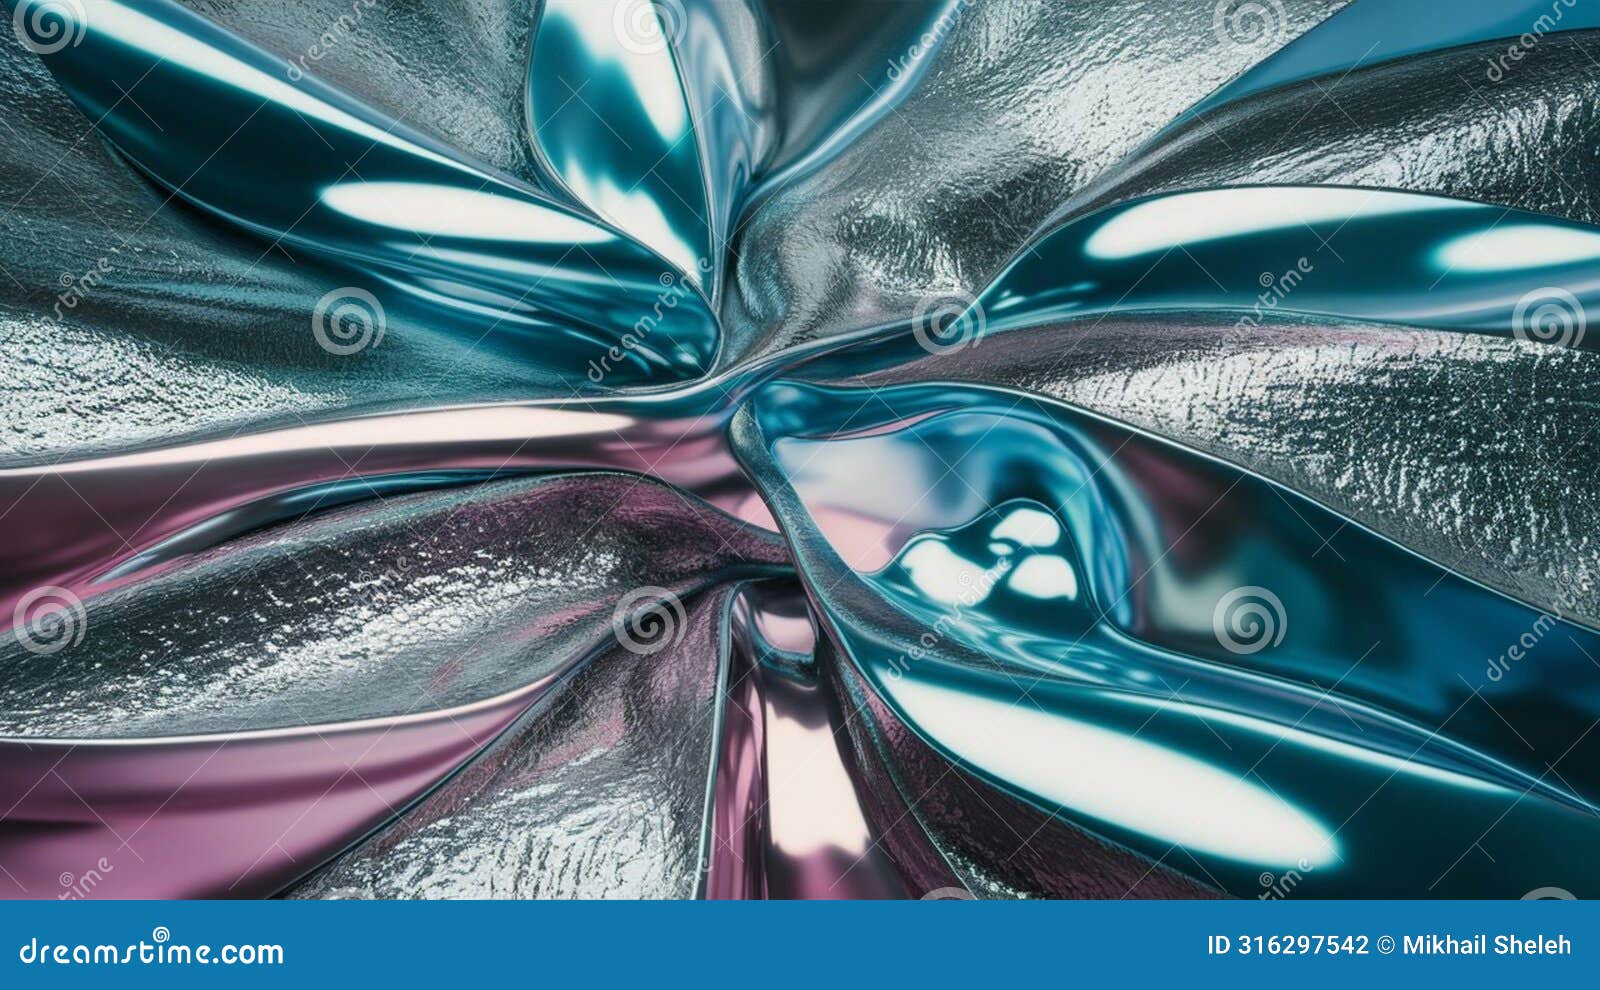 abstract metallic background formed by straight and sinuous lines